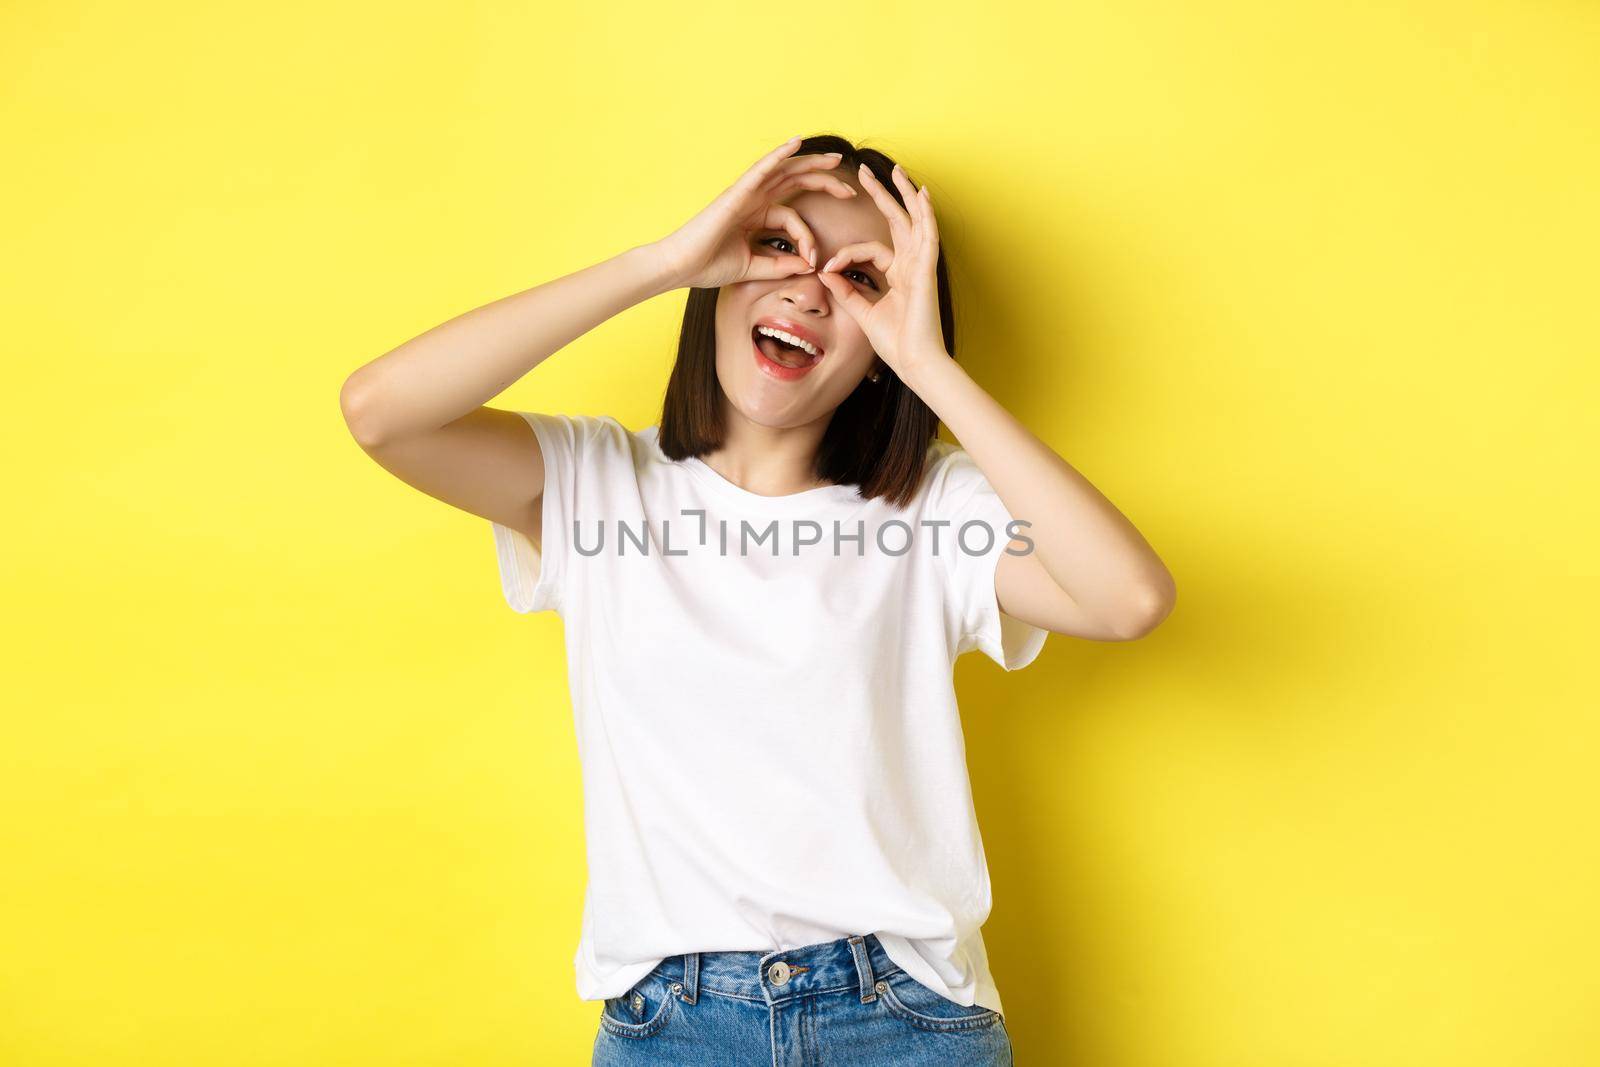 Funny asian girl looking through hand binoculars and smiling, stading over yellow background.